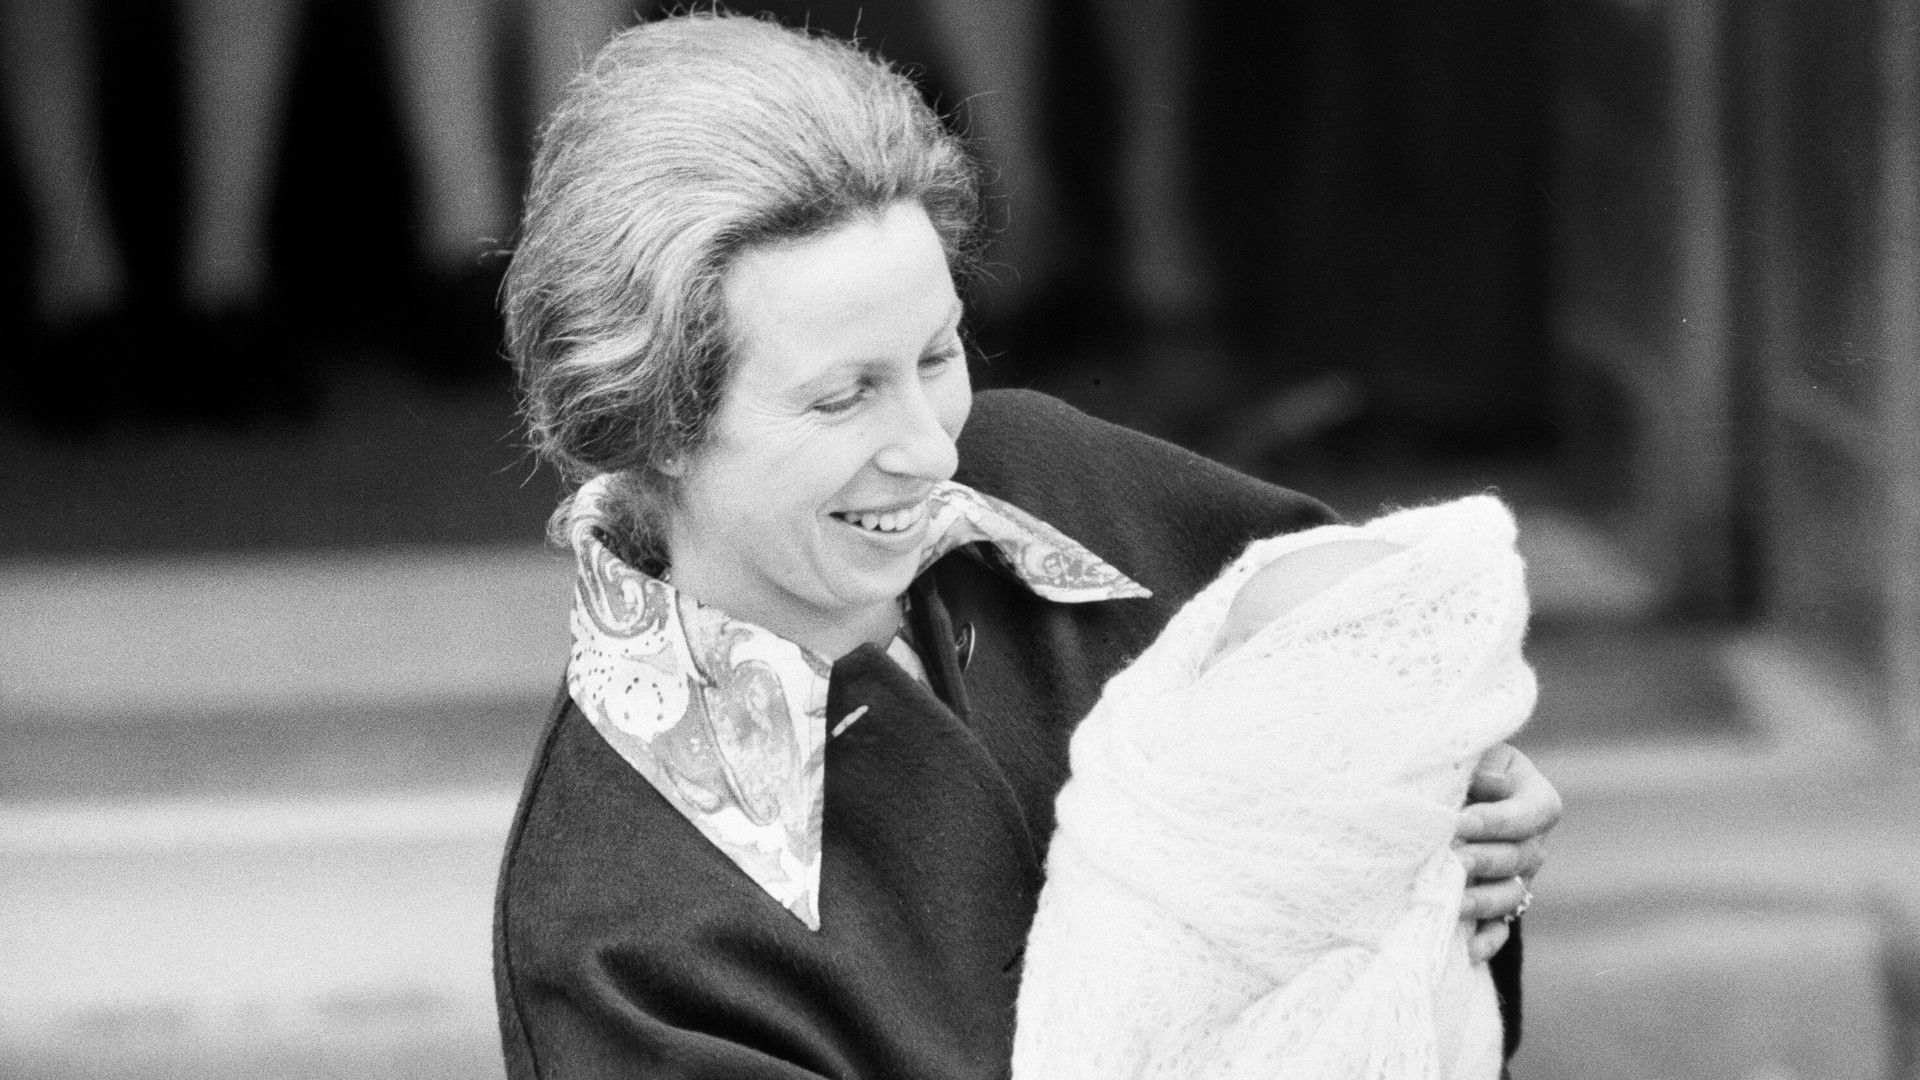 <p>                     The Princess Royal kicked off a royal tradition when she welcomed her daughter Zara Phillips in May 1981, posing on the steps of the Lindo Wing at St. Mary’s Hospital with her newborn – the first time a royal had ever done so after giving birth.                   </p>                                      <p>                     Princess Anne's example has since been followed by many royal couples – Diana and Charles both posed on the steps of the hospital with their two sons, as did Catherine and William with their three children, Prince George, Princess Charlotte and Prince Louis.                   </p>                                      <p>                     Prince Harry and Meghan opted for a different hospital for the birth of their son Archie Harrison Mountbatten-Windsor, but still took part in a royal photo call at Windsor Castle a few days later.                   </p>